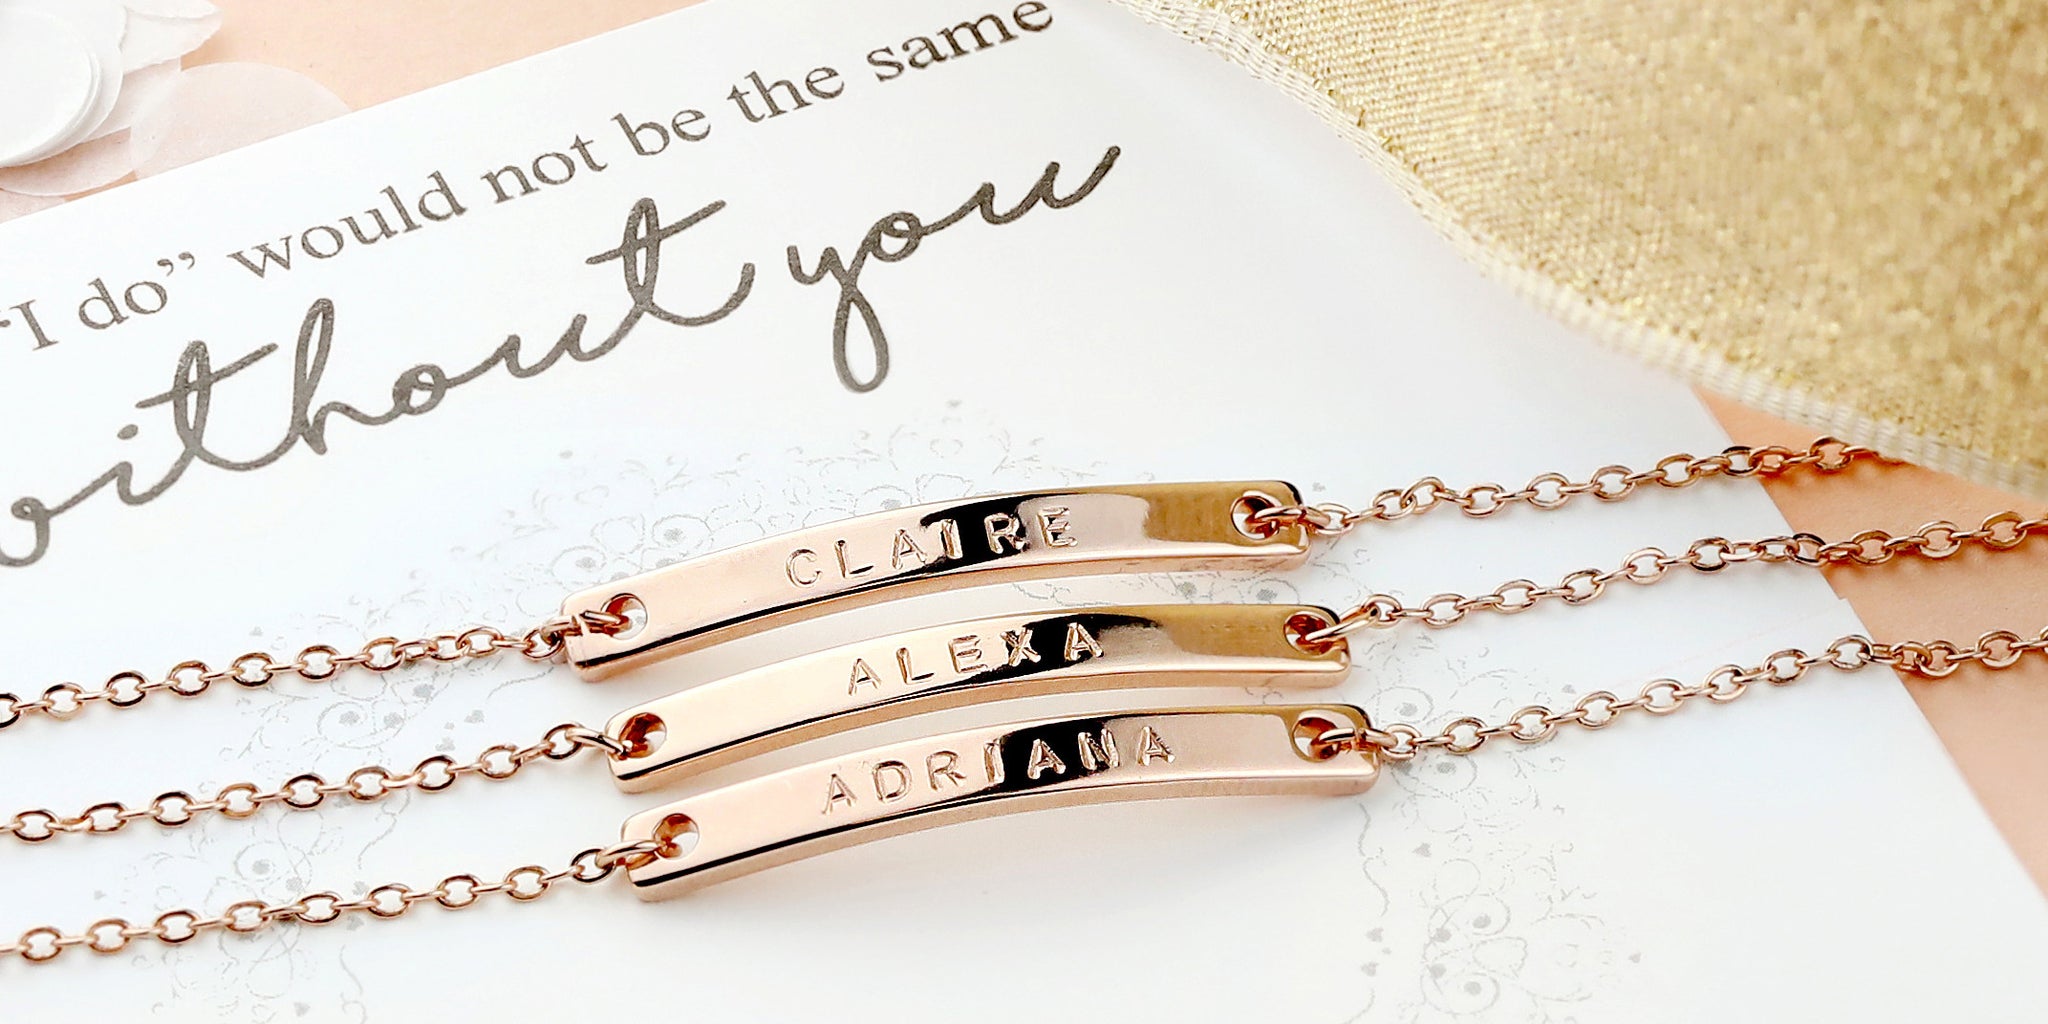 Will You Be My Bridesmaid Proposal Gift Bridesmaid Gift Box Monogram Bracelet Personalized Bracelet Bridesmaid Jewelry Bridesmaid Gift Set